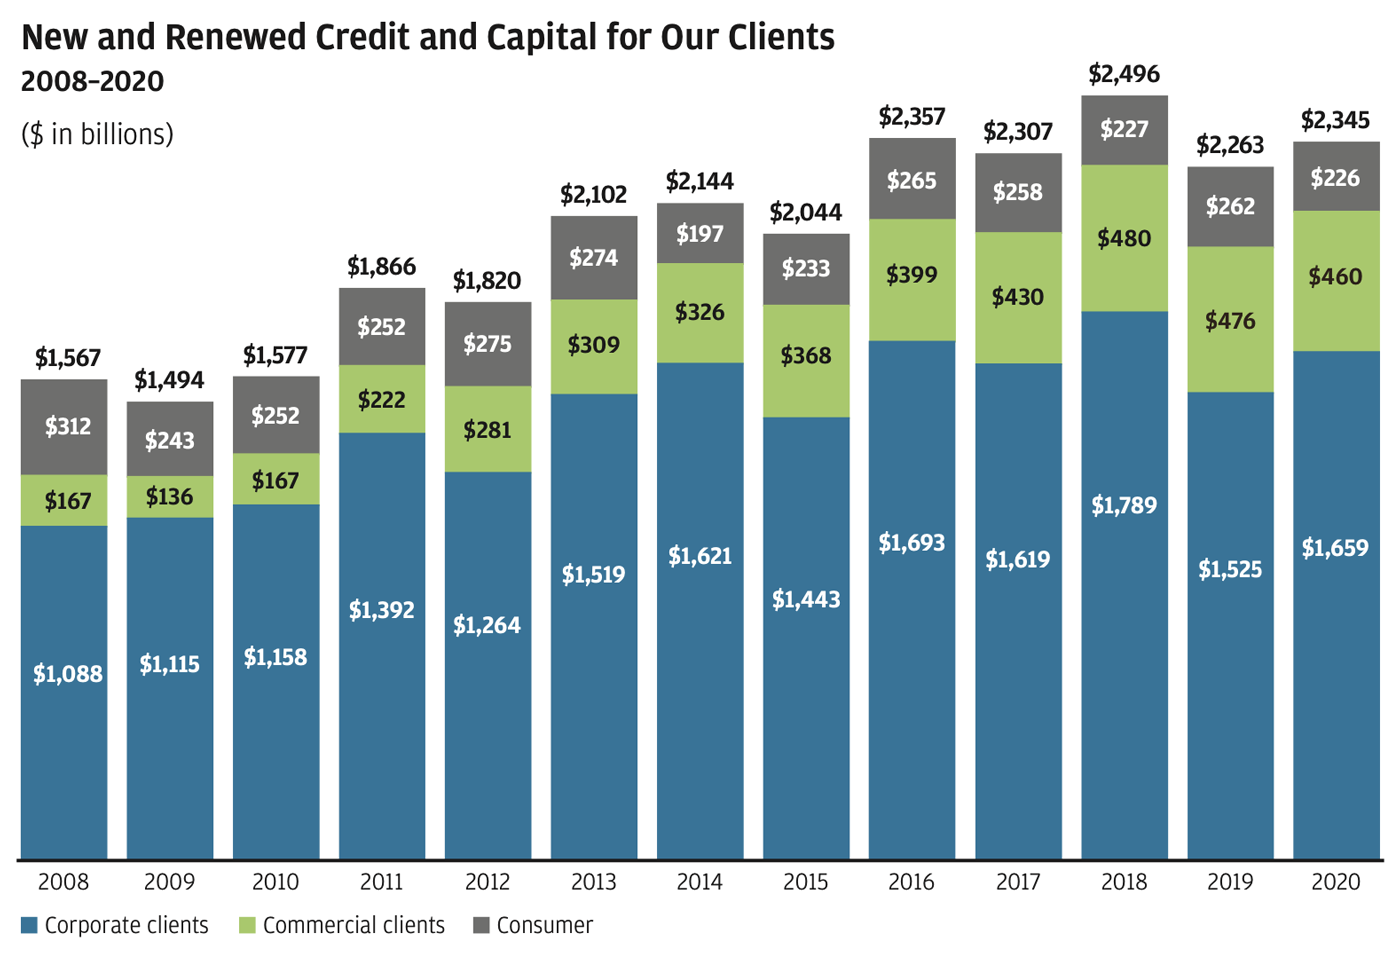 Stacked bar graph showing 2008 to 2020 trend of new and renewed credit and capital for our clients (split by Corporate clients, Commercial clients and Consumer)